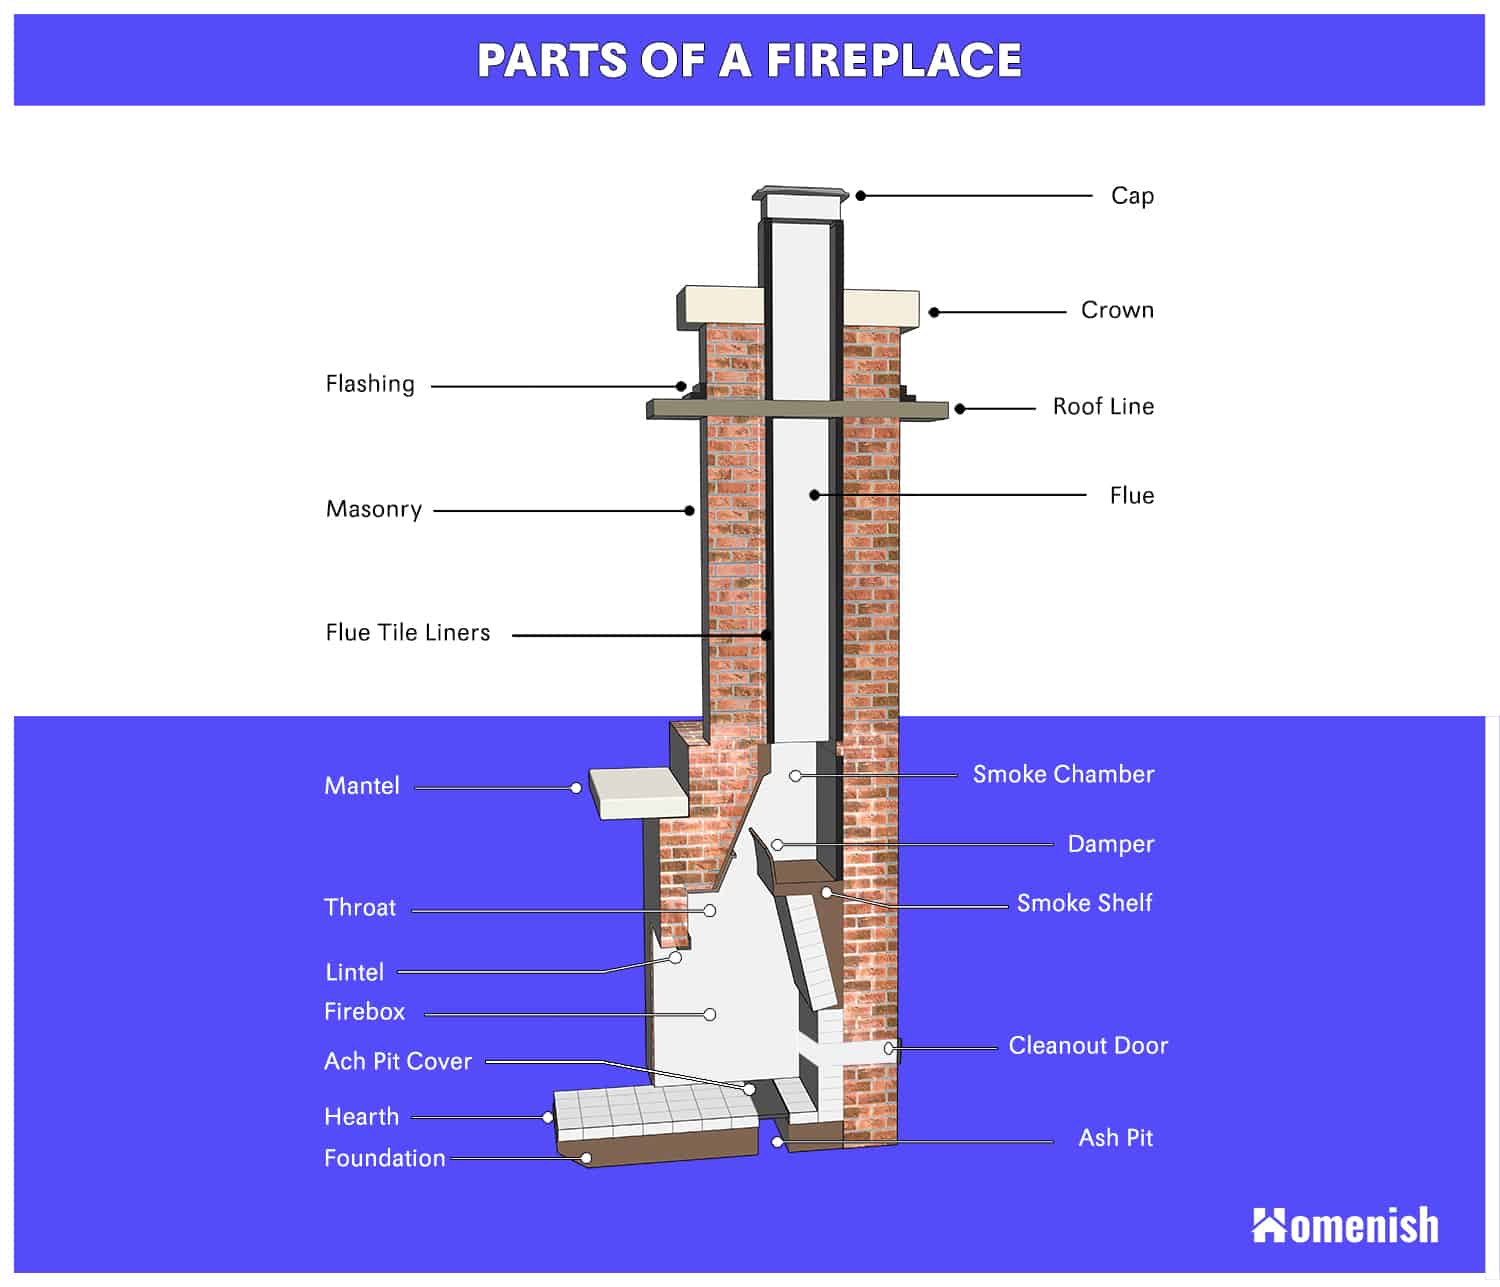 Parts of a Fireplace